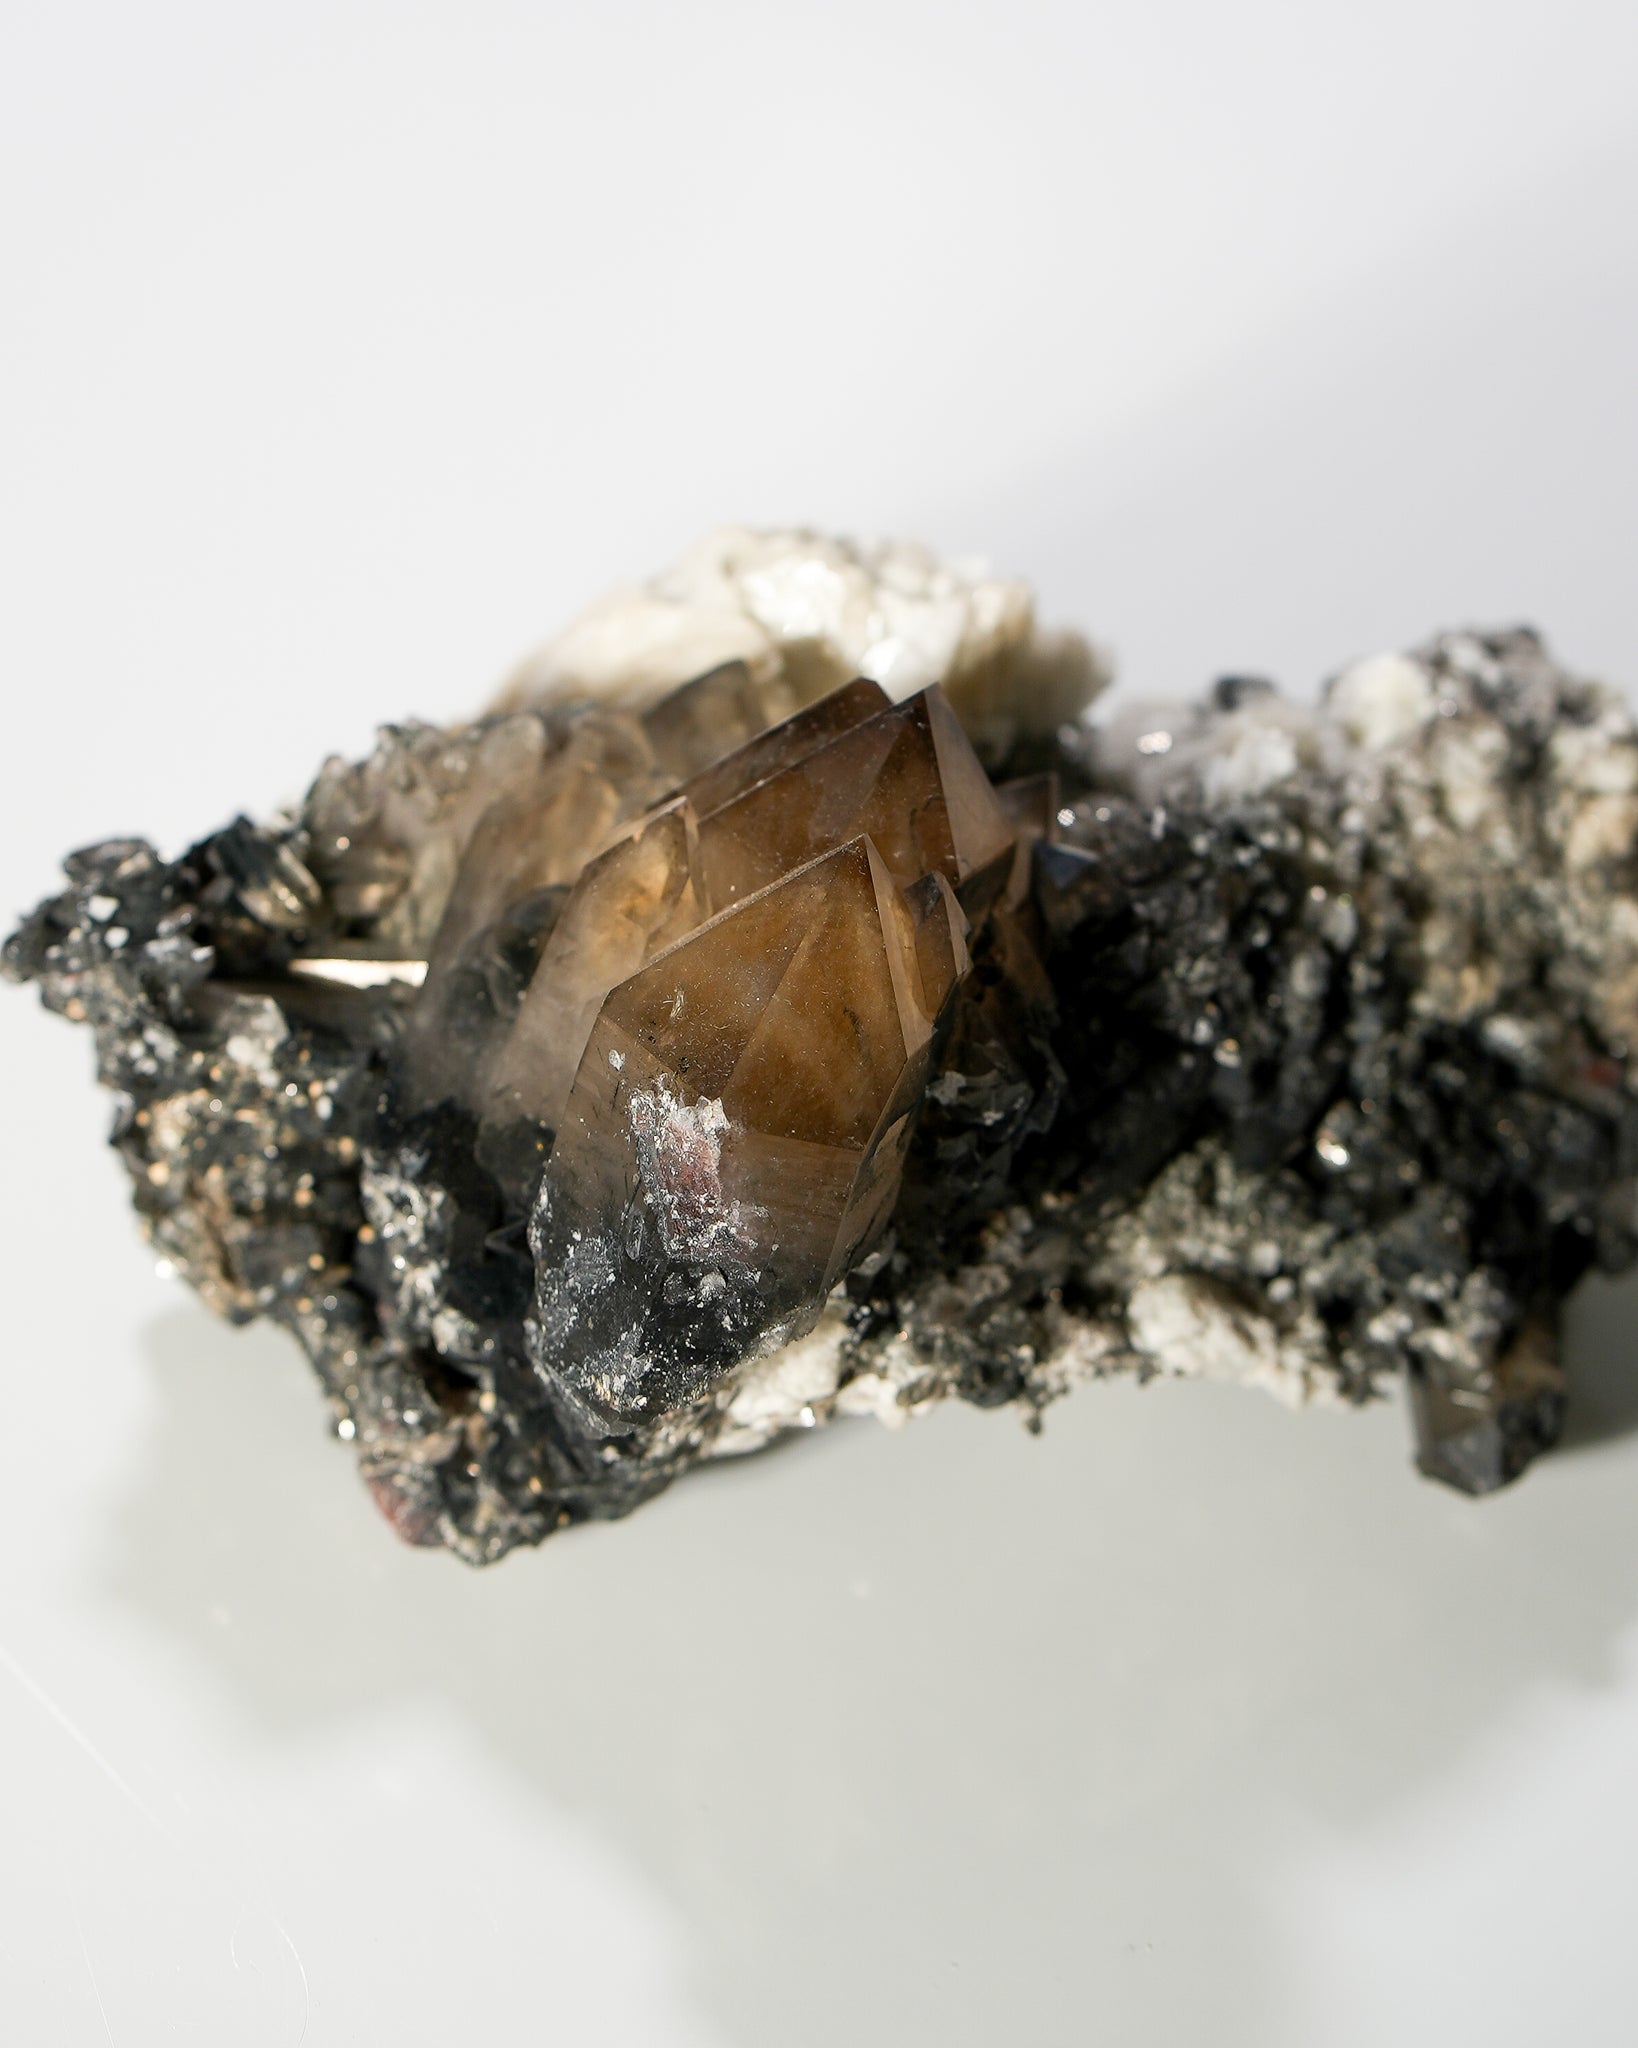 Smokey Quartz Included by Schorl Tourmaline with Albite and Muscovite